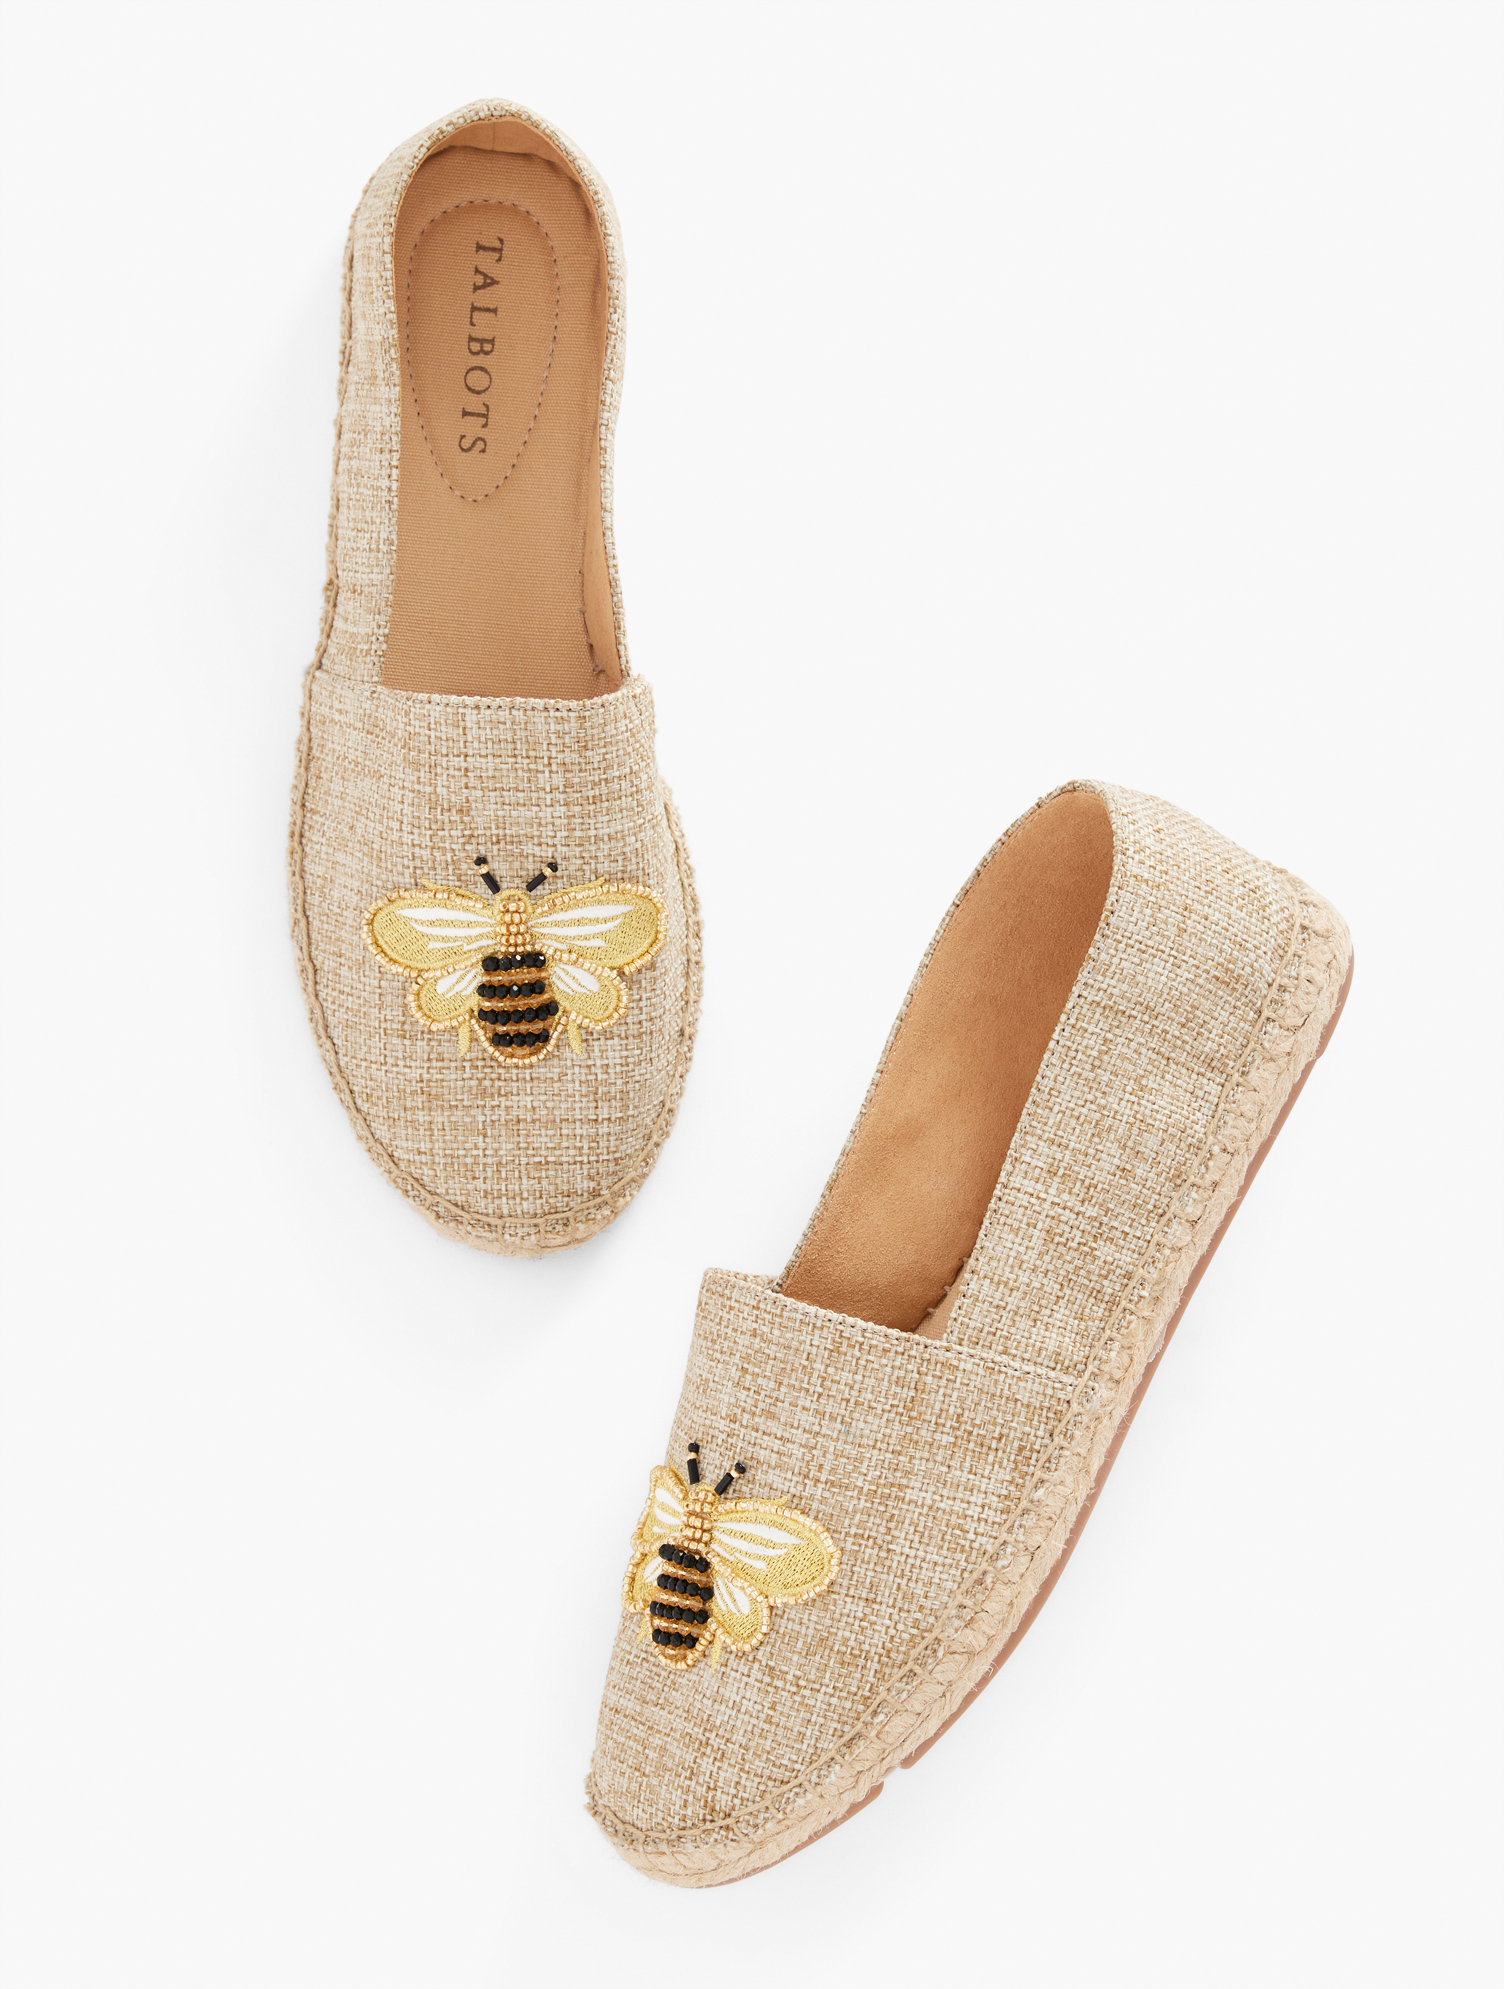 Talbots Izzy Espadrille Flats - Beaded Bee - Natural - 6m - 100% Cotton